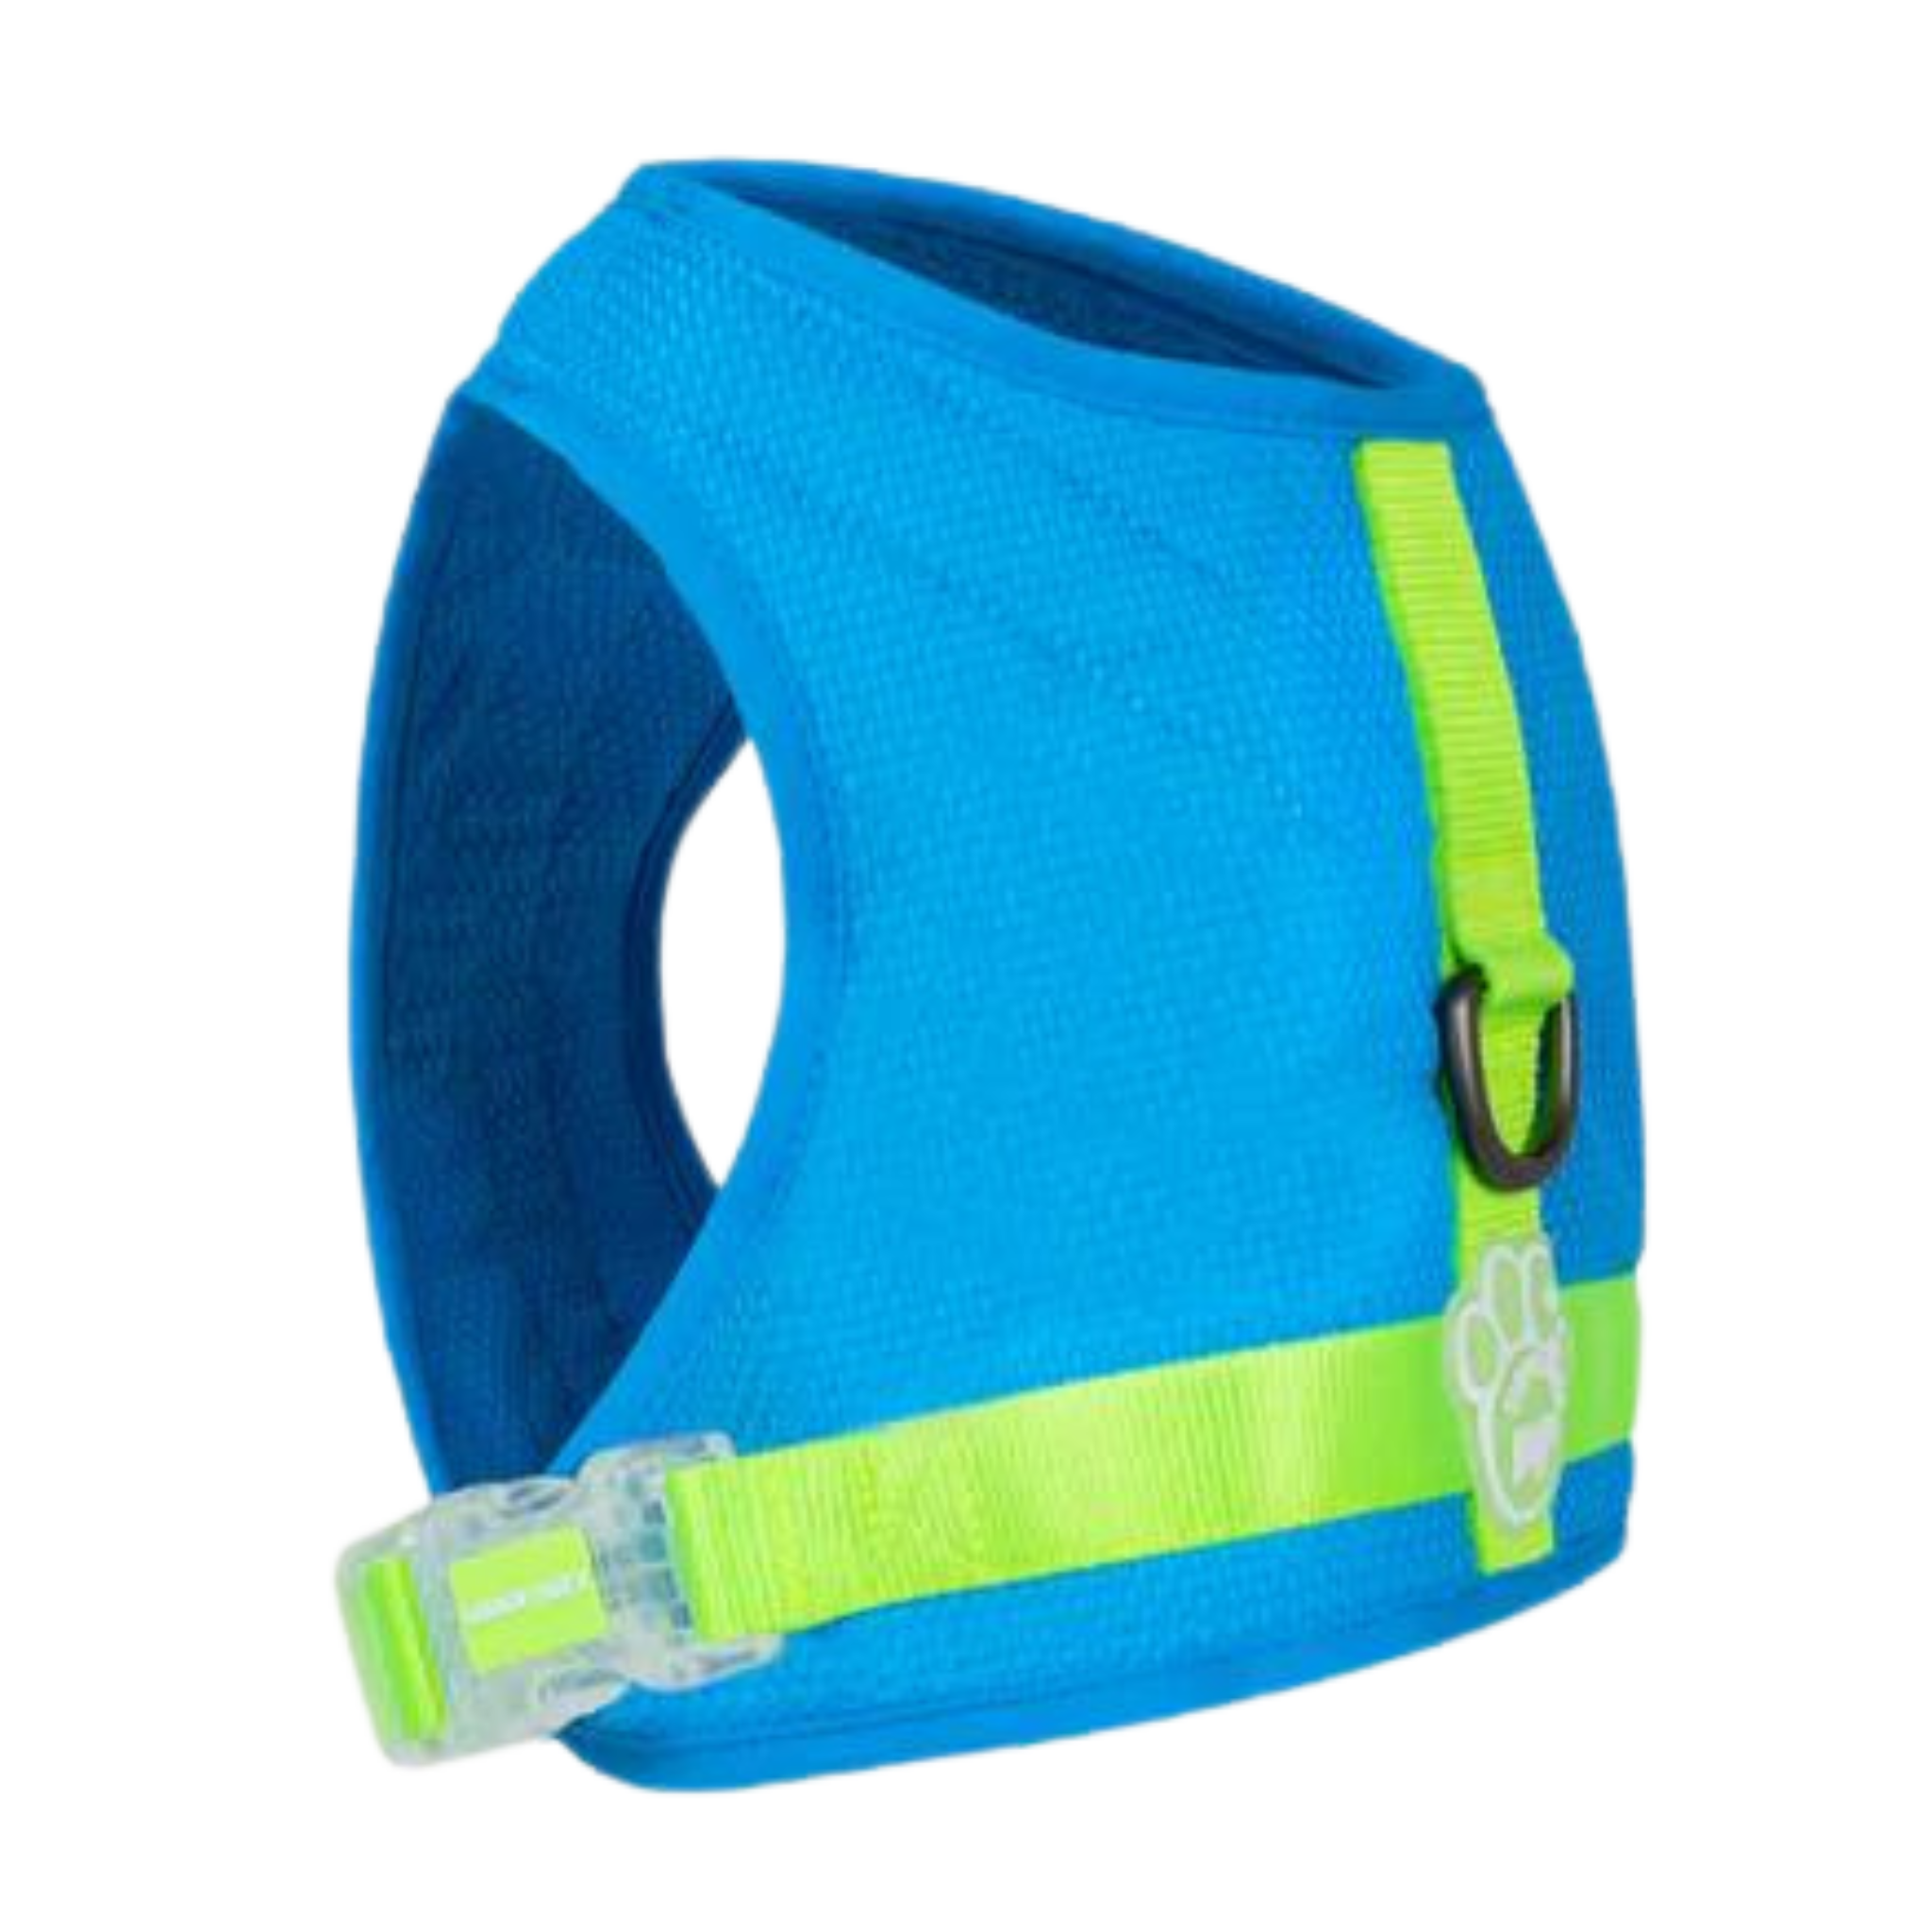 Canada Pooch Chill Seeker Cooling Dog Harness Blue